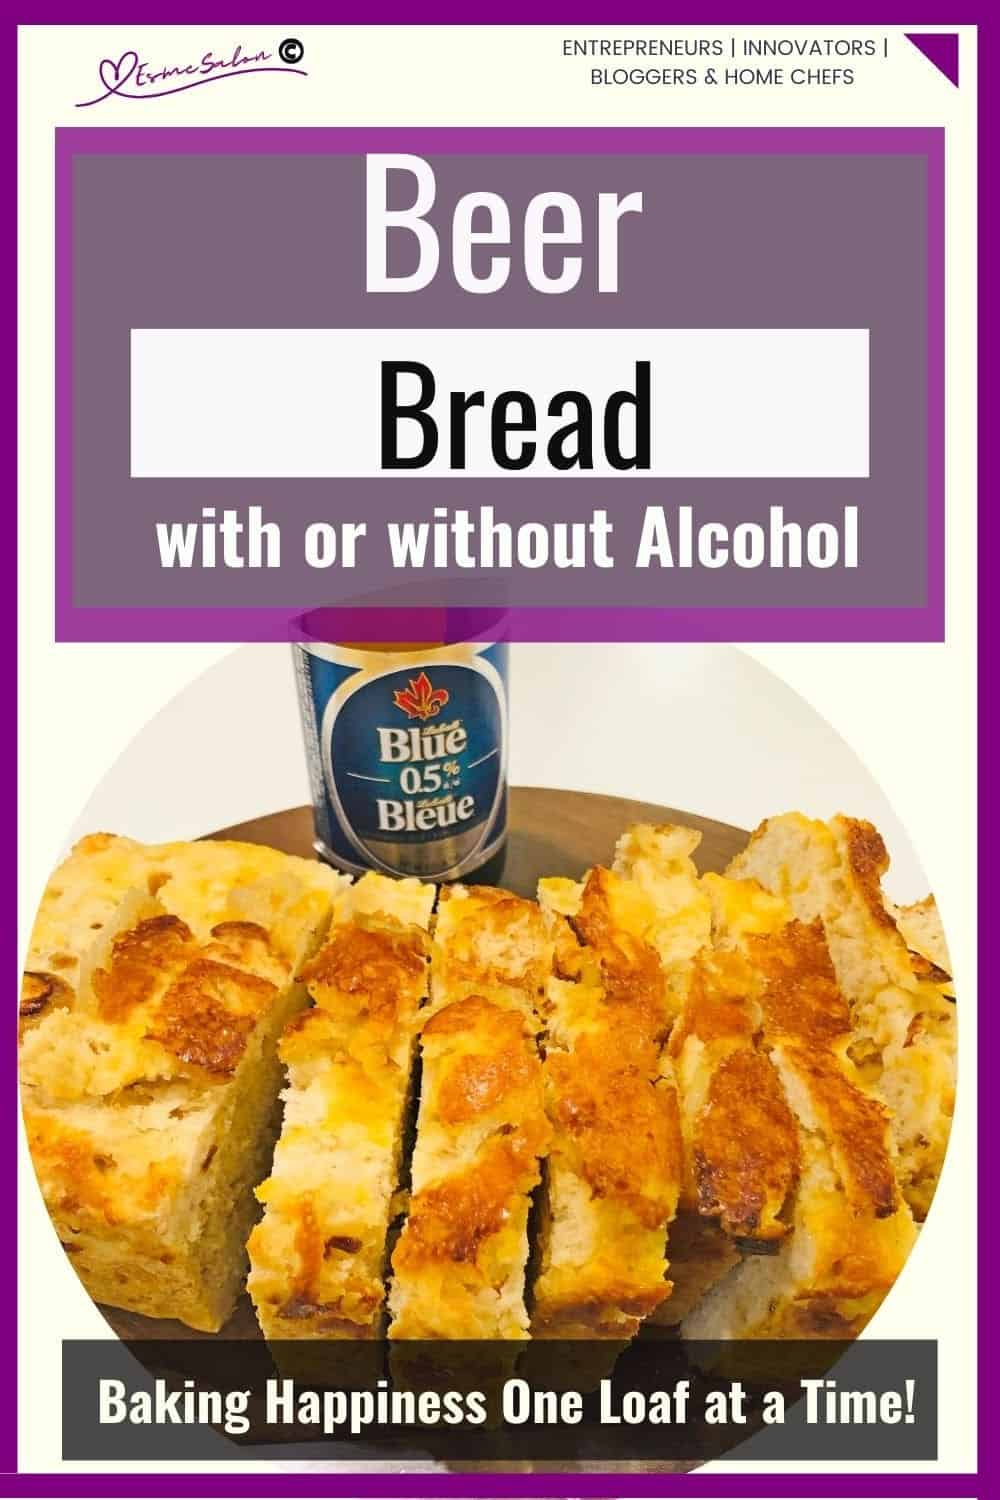 an image of a loaf of sliced Beer Bread sliced and placed on a wooden board with a empty bottle of 0% alcohol beer in the background